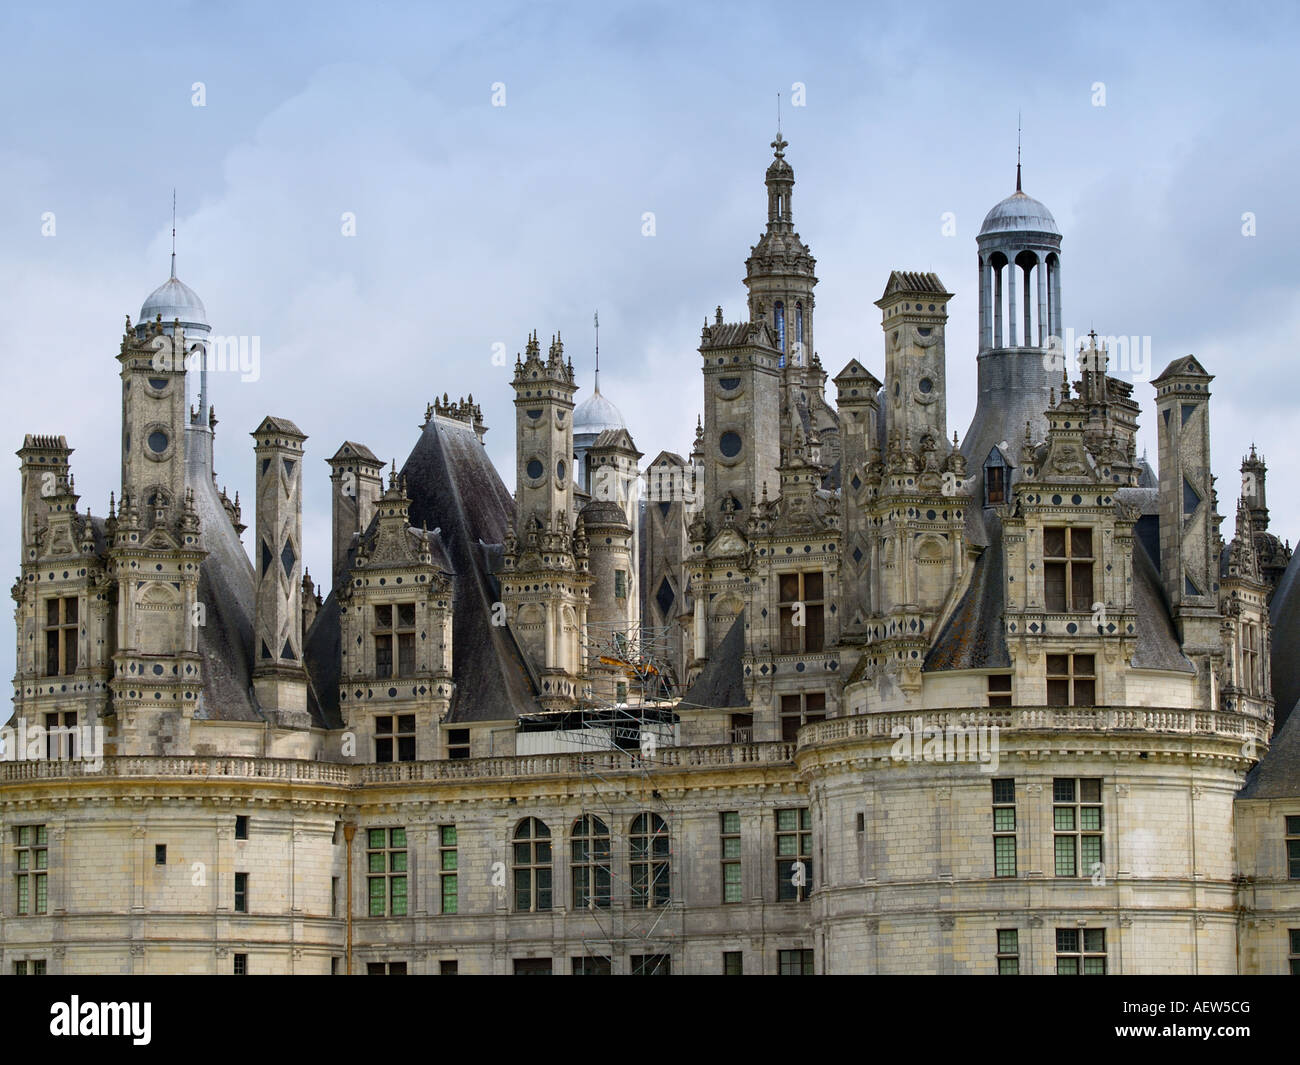 Chateau de Chambord in the Loire Valley, France, is an architectural masterpiece Stock Photo